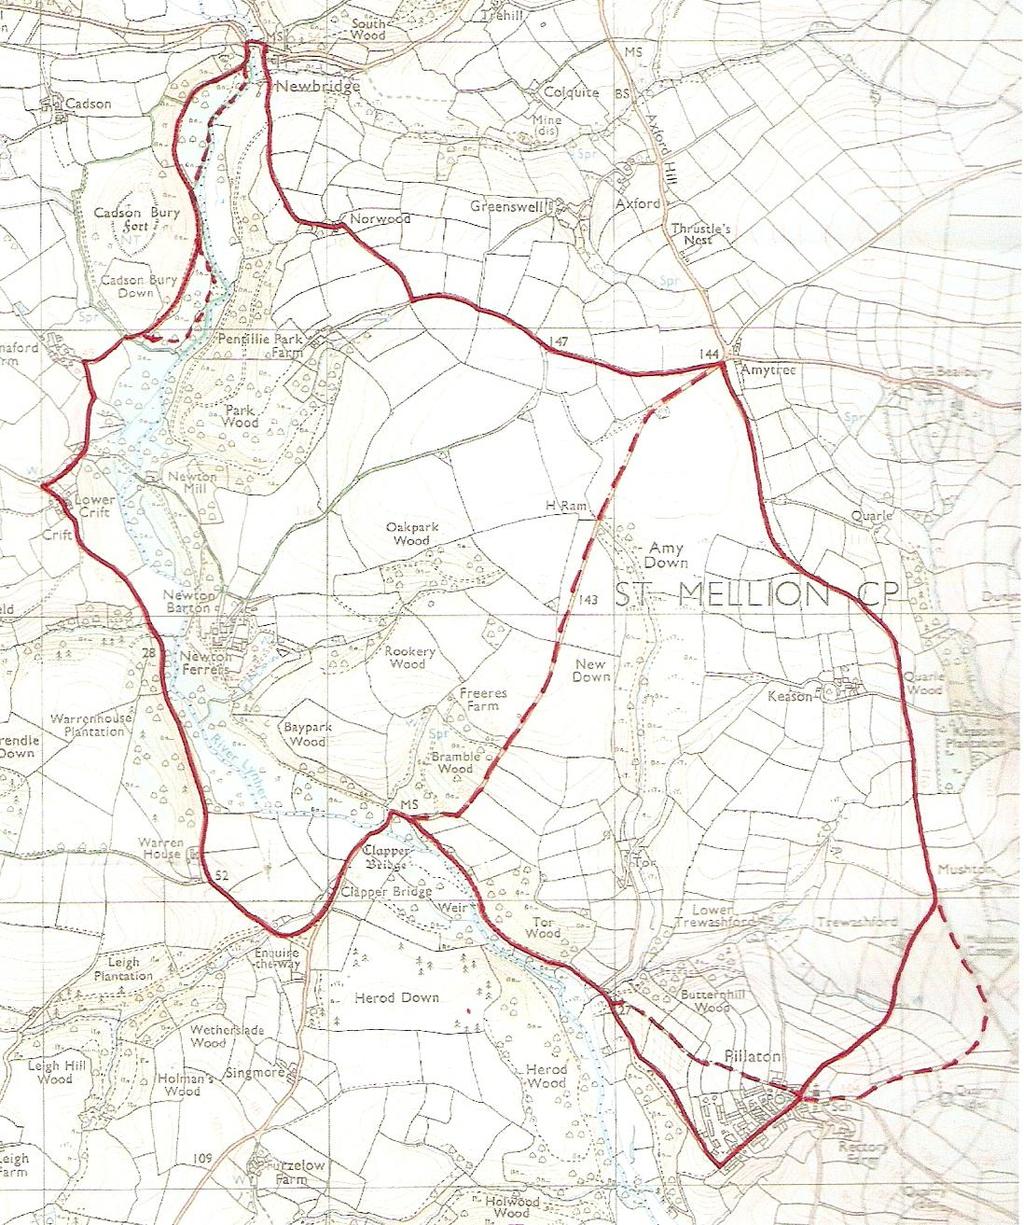 Pillaton to Callington Newbridge via Amytree and Clapper Bridge 4 National Trust Turn 2/ 2 Alternative route 1 Alternative route Approximate Distance: 7.5 miles Approximate Time: 3 to 3.5 hours 1.